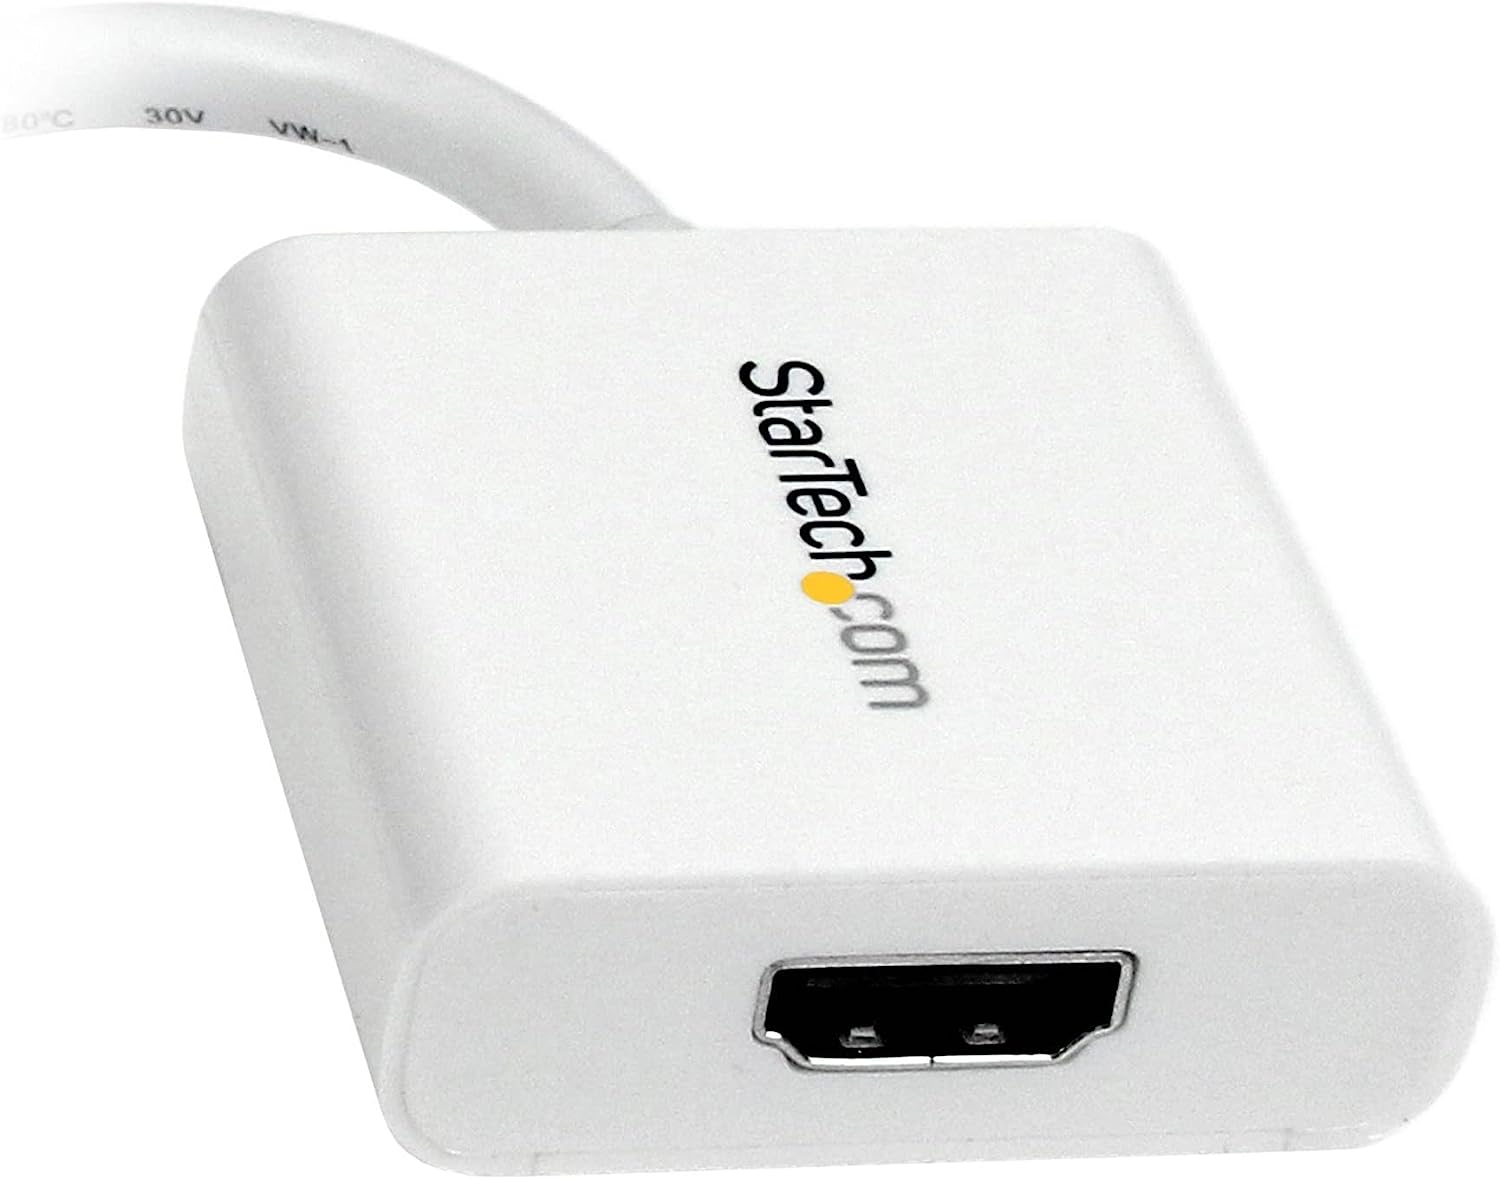 StarTech.com Mini DisplayPort to HDMI Video Adapter Converter 1920x1200 - White Mini DP to HDMI Adapter M/F (MDP2HDW) - image 2 of 3